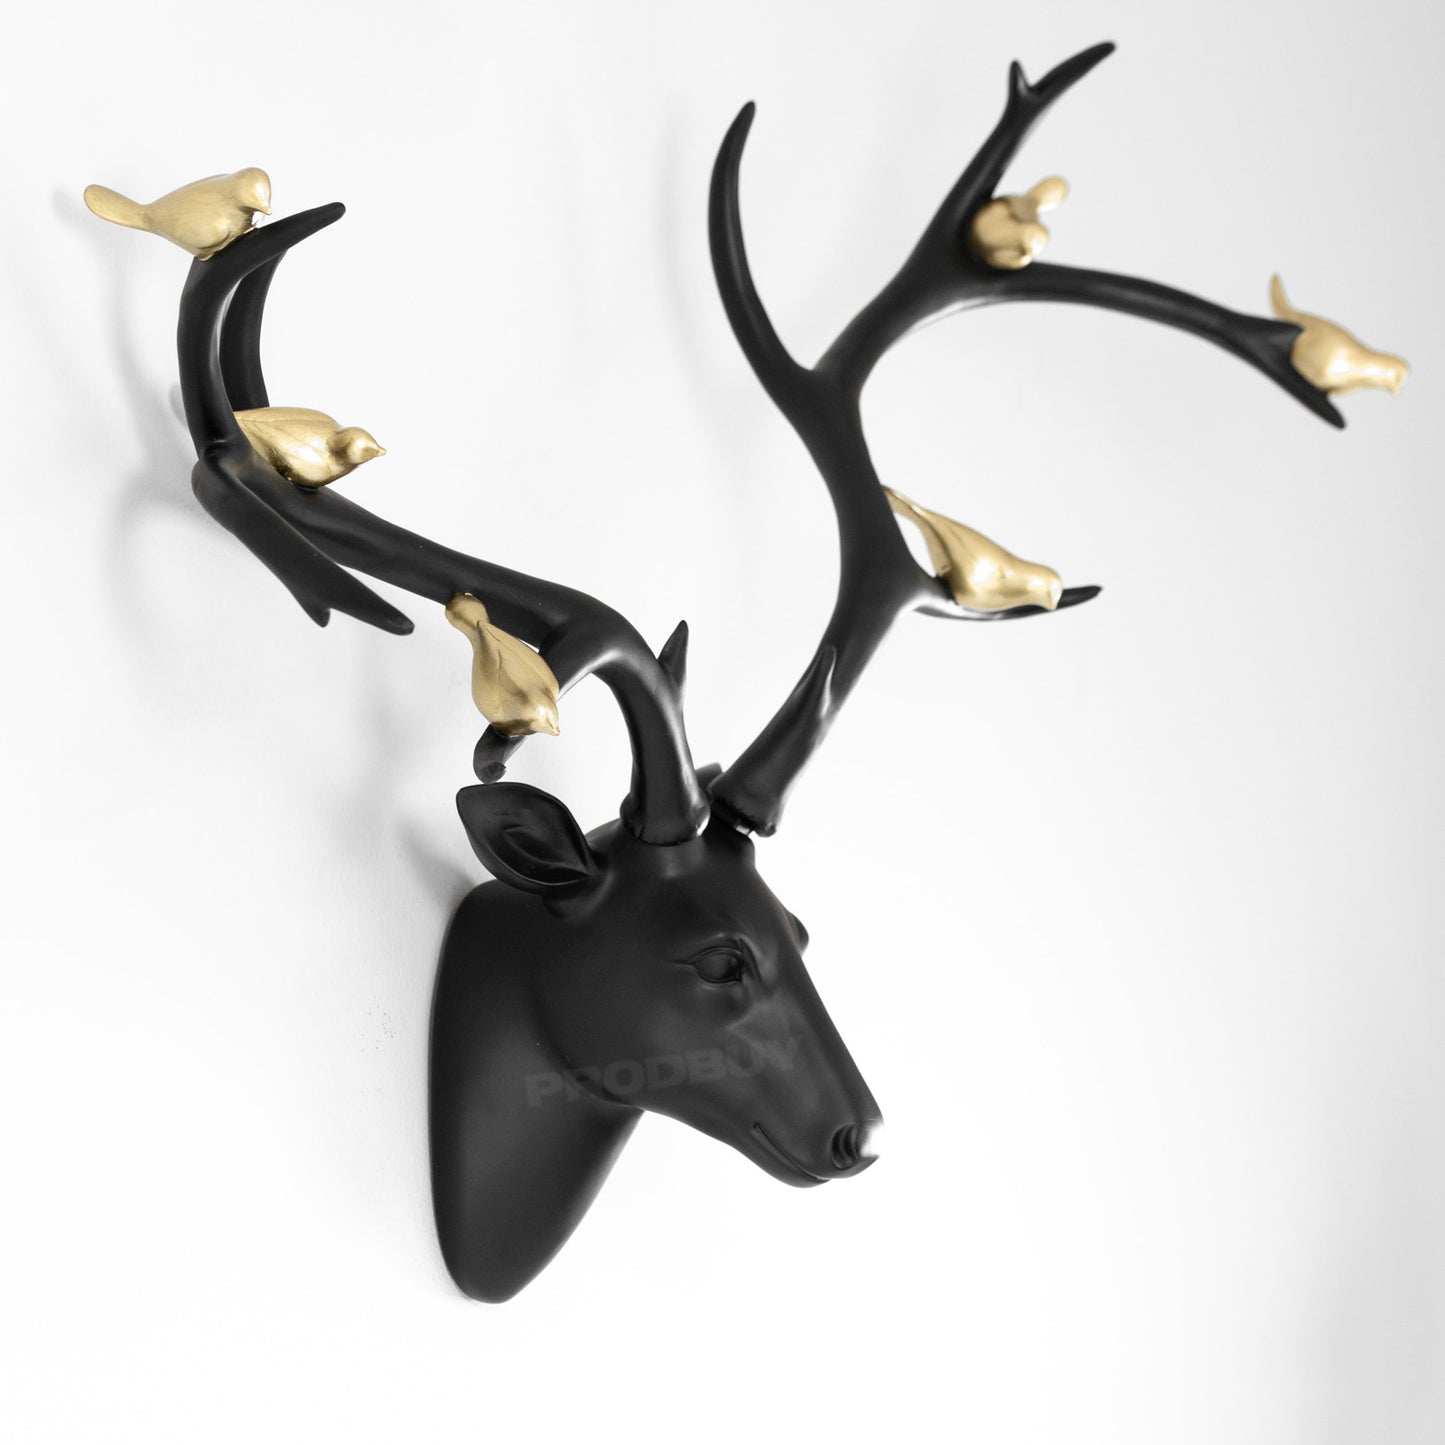 Black Stag Head Wall Decoration with Gold Birds on Antlers